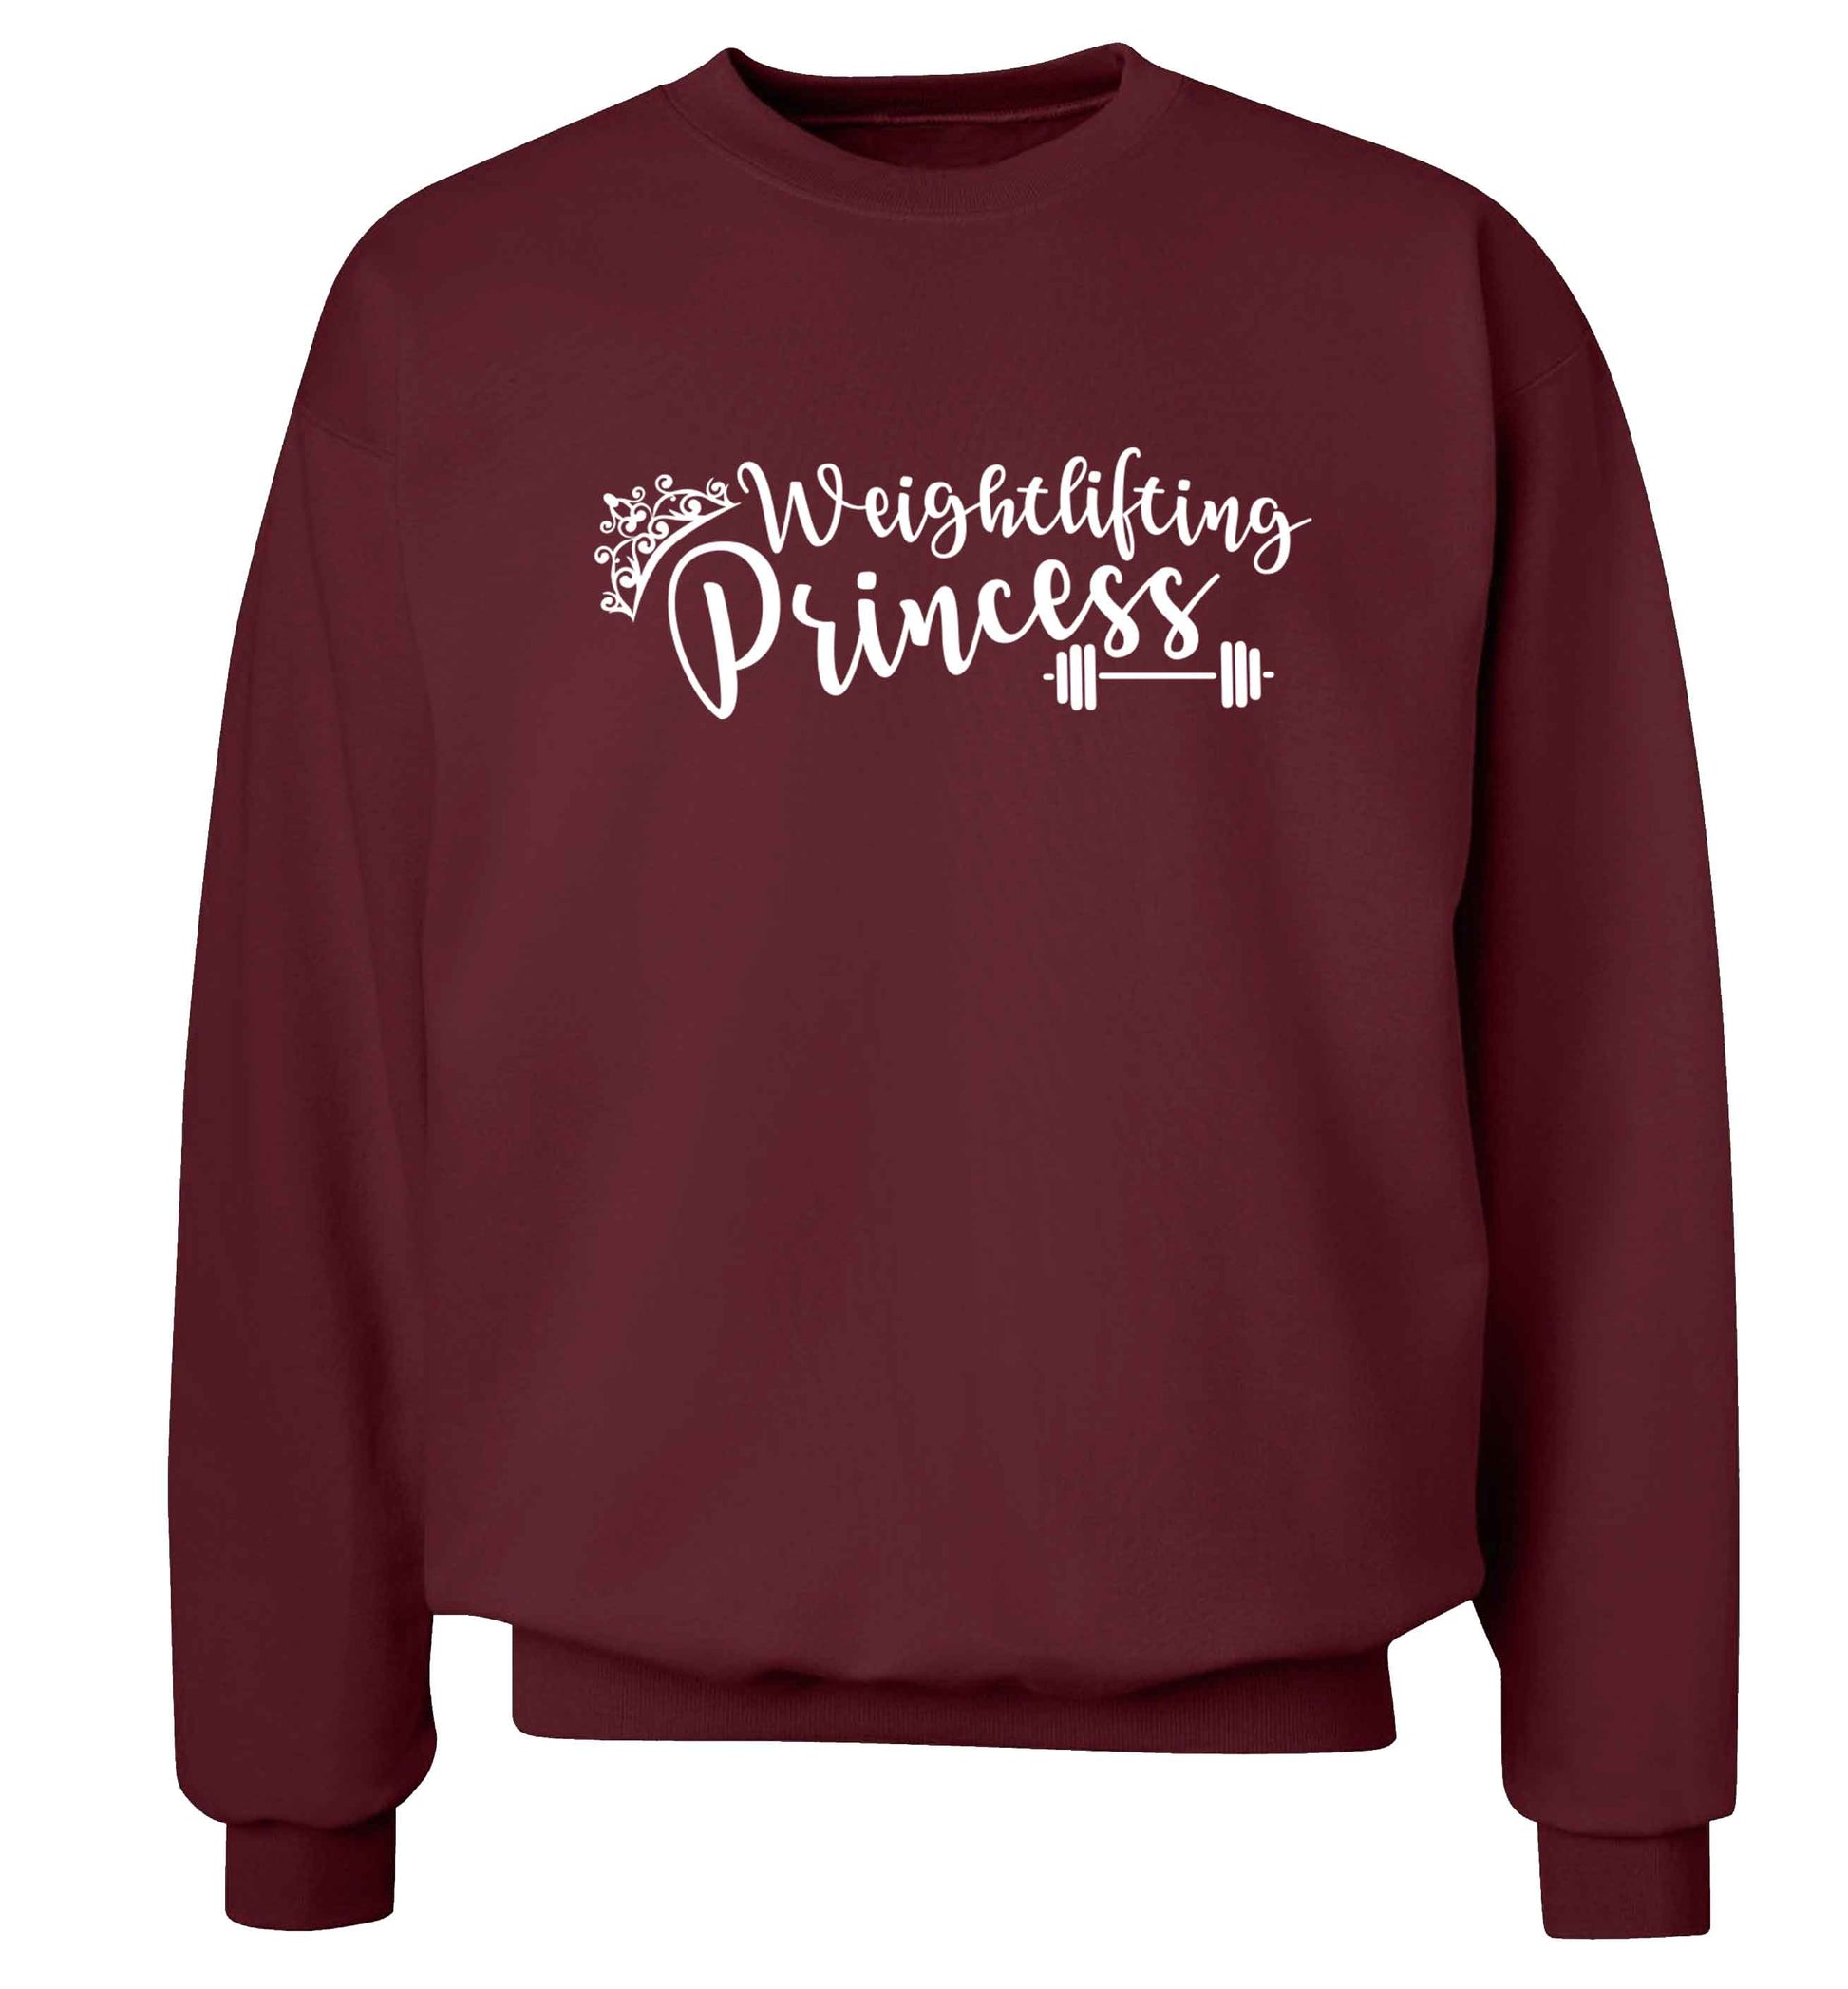 Weightlifting princess Adult's unisex maroon Sweater 2XL